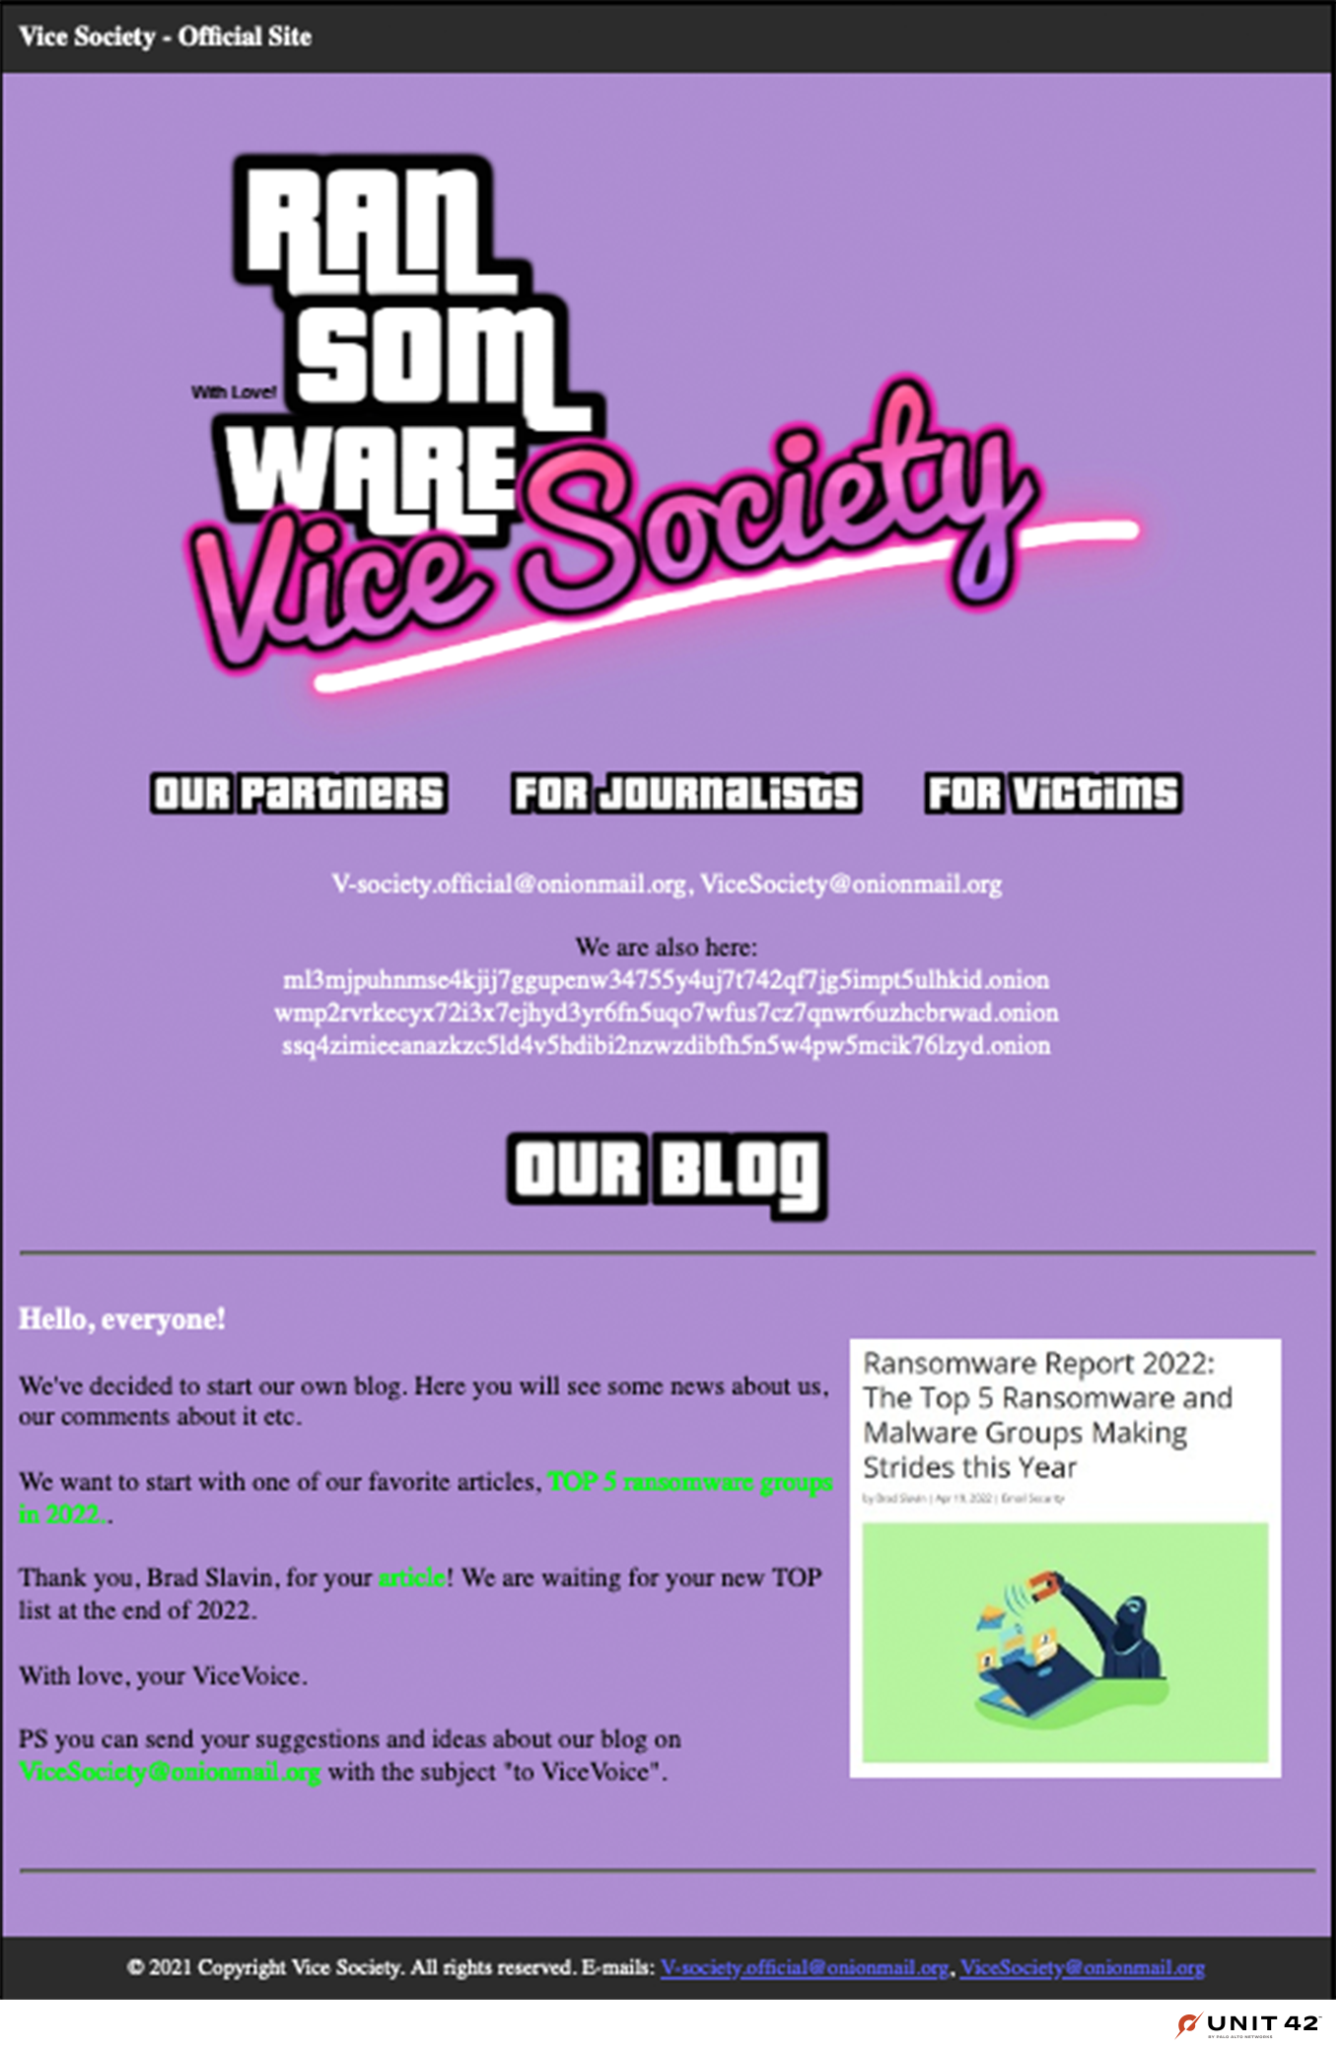 Figure 9 is a screenshot of Vice Society's "Our Blog" section highlighting press received by the gang and requesting more press tips. 